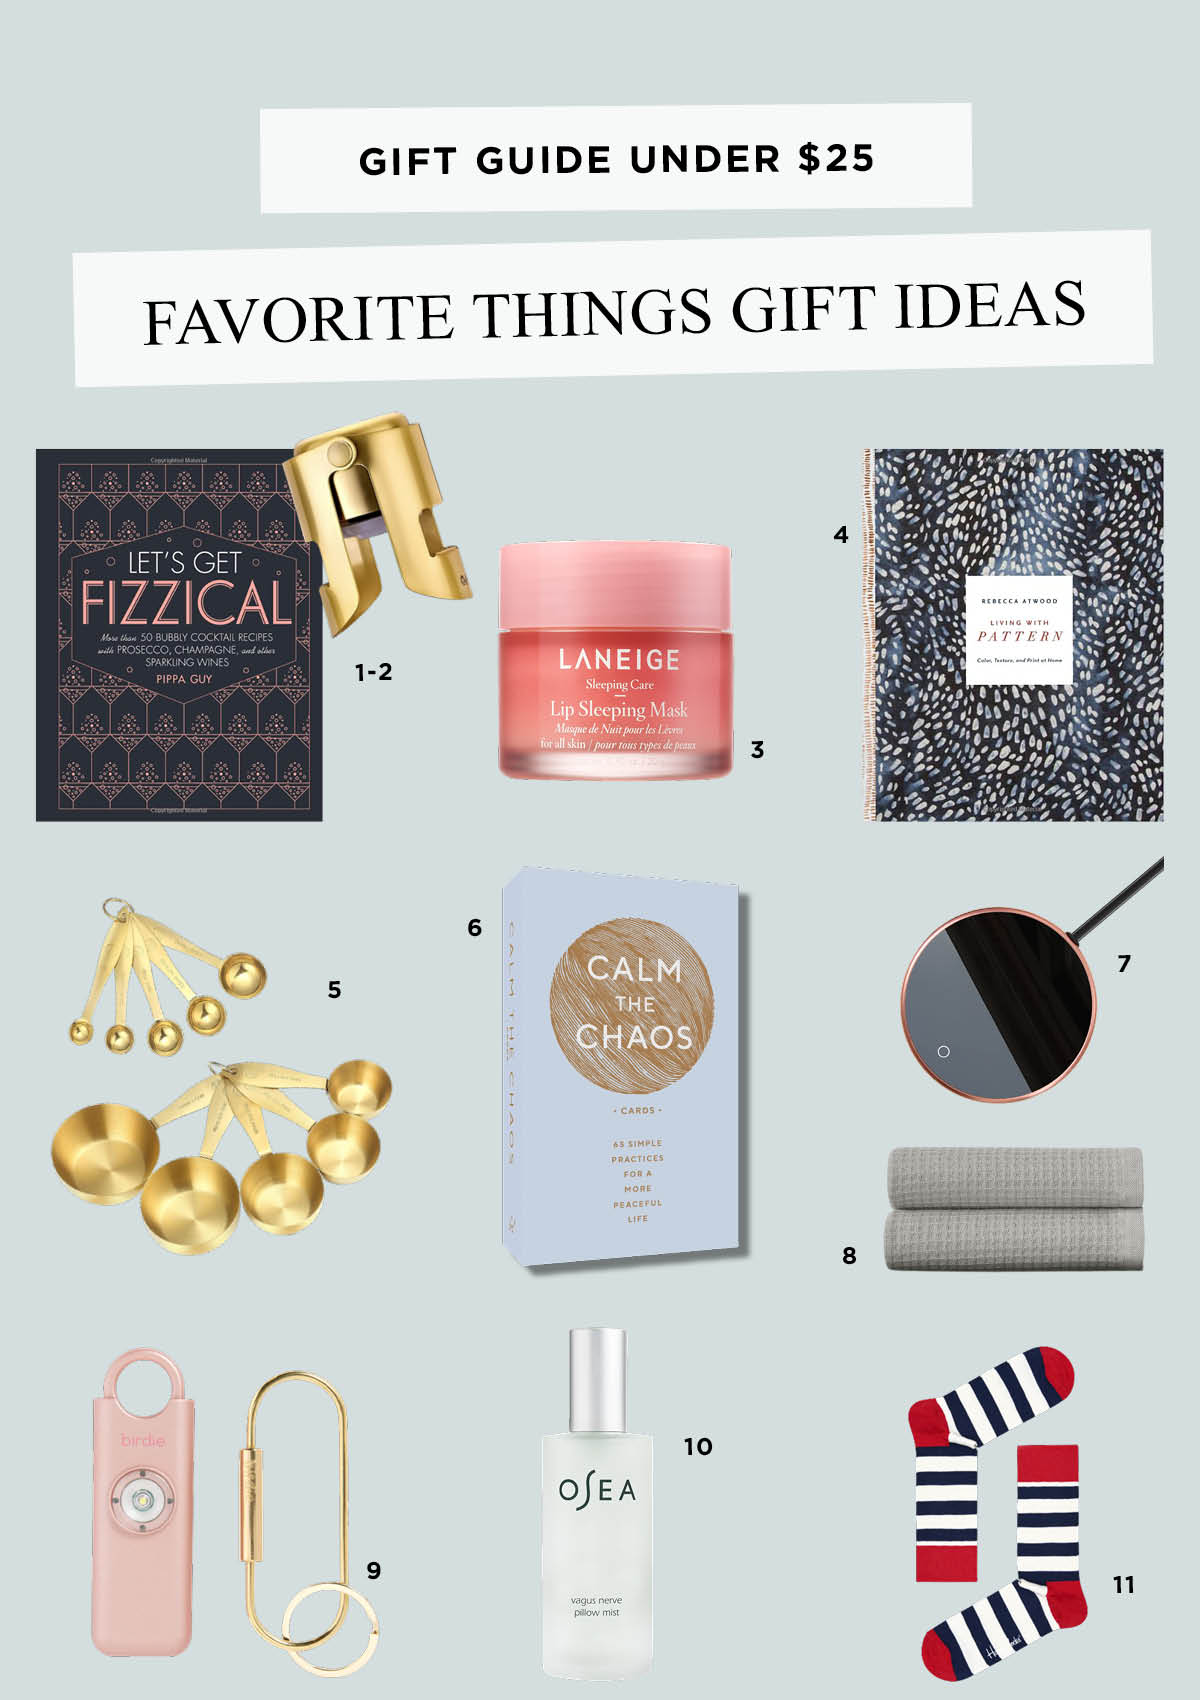 Favorite Things Party Gift Ideas under $25